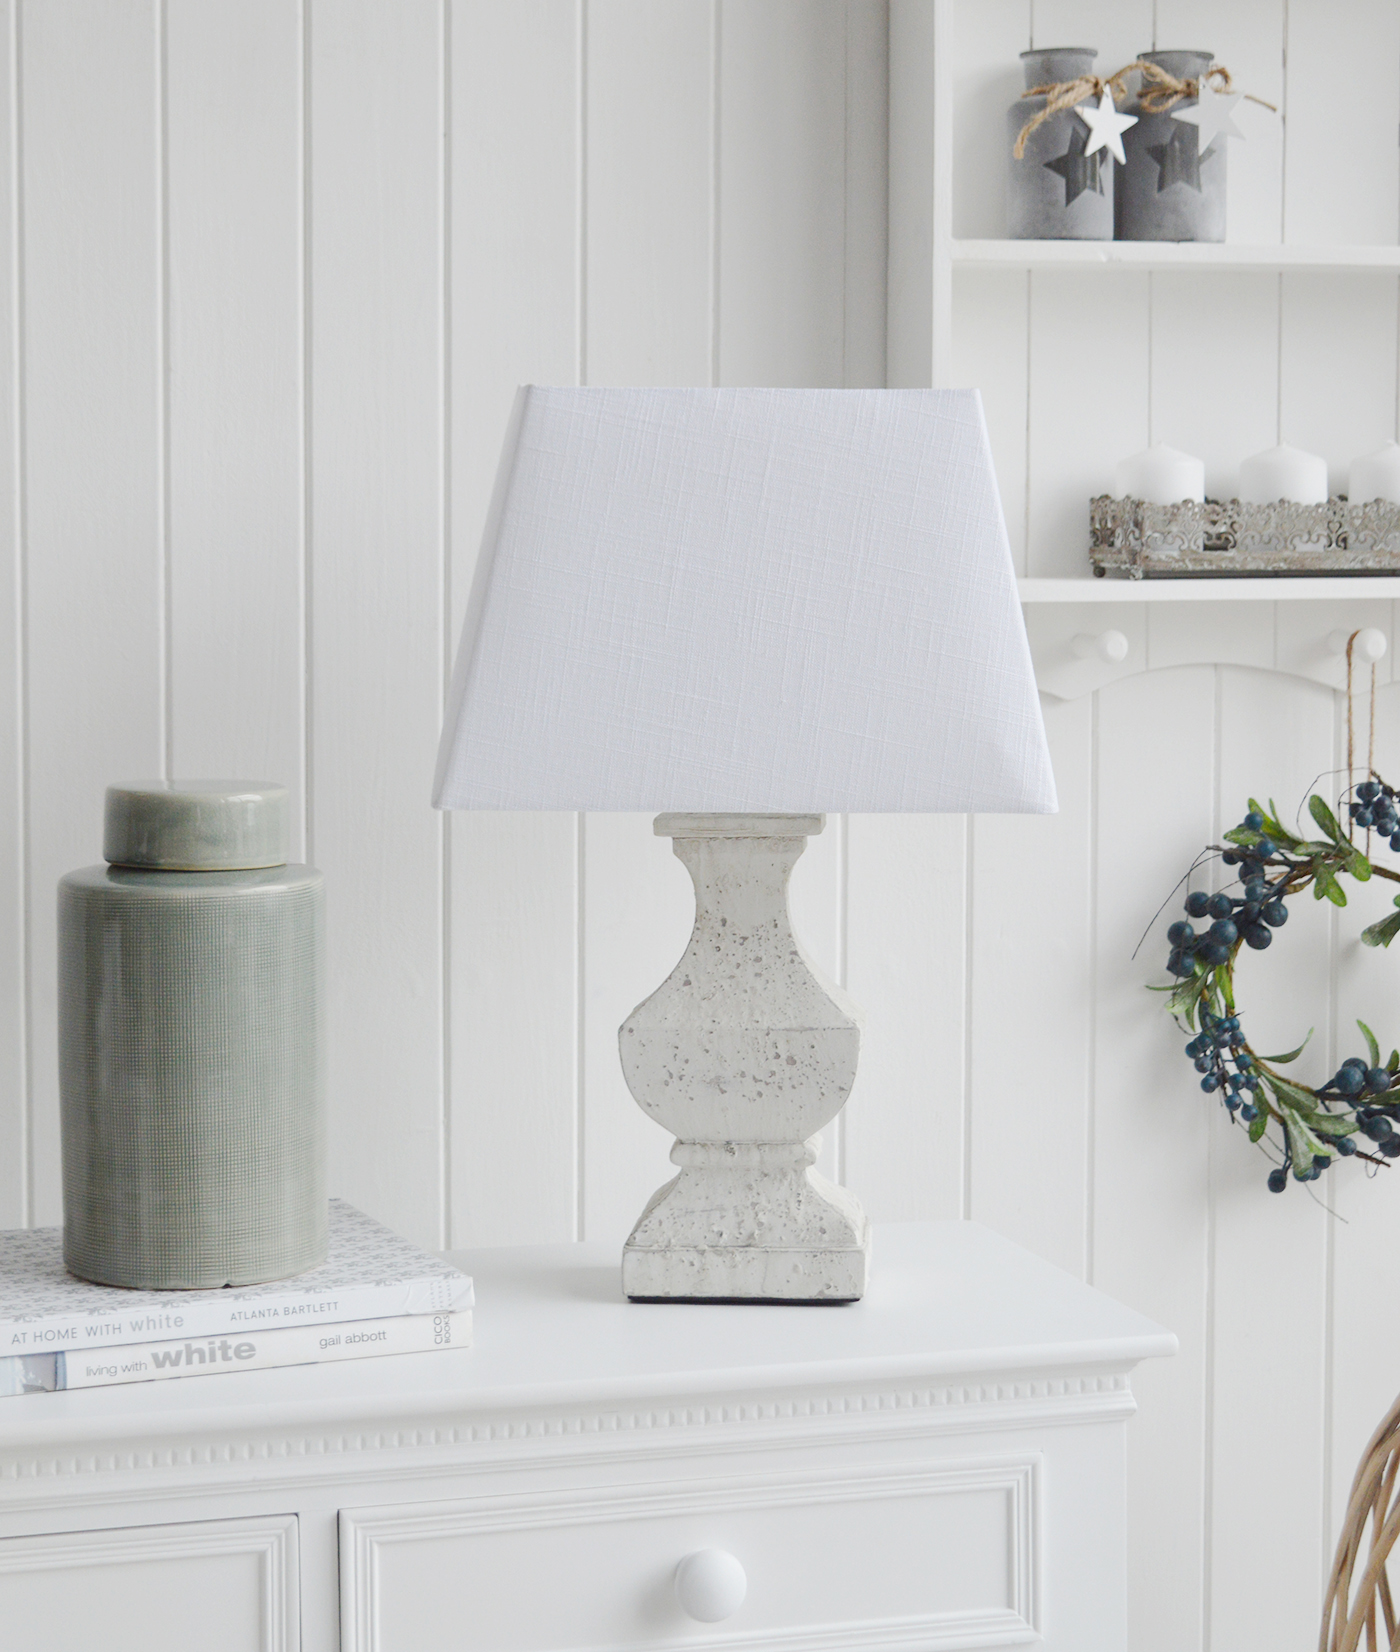 Hartford Rustic White Table Lamp The, White Rustic Table Lamp